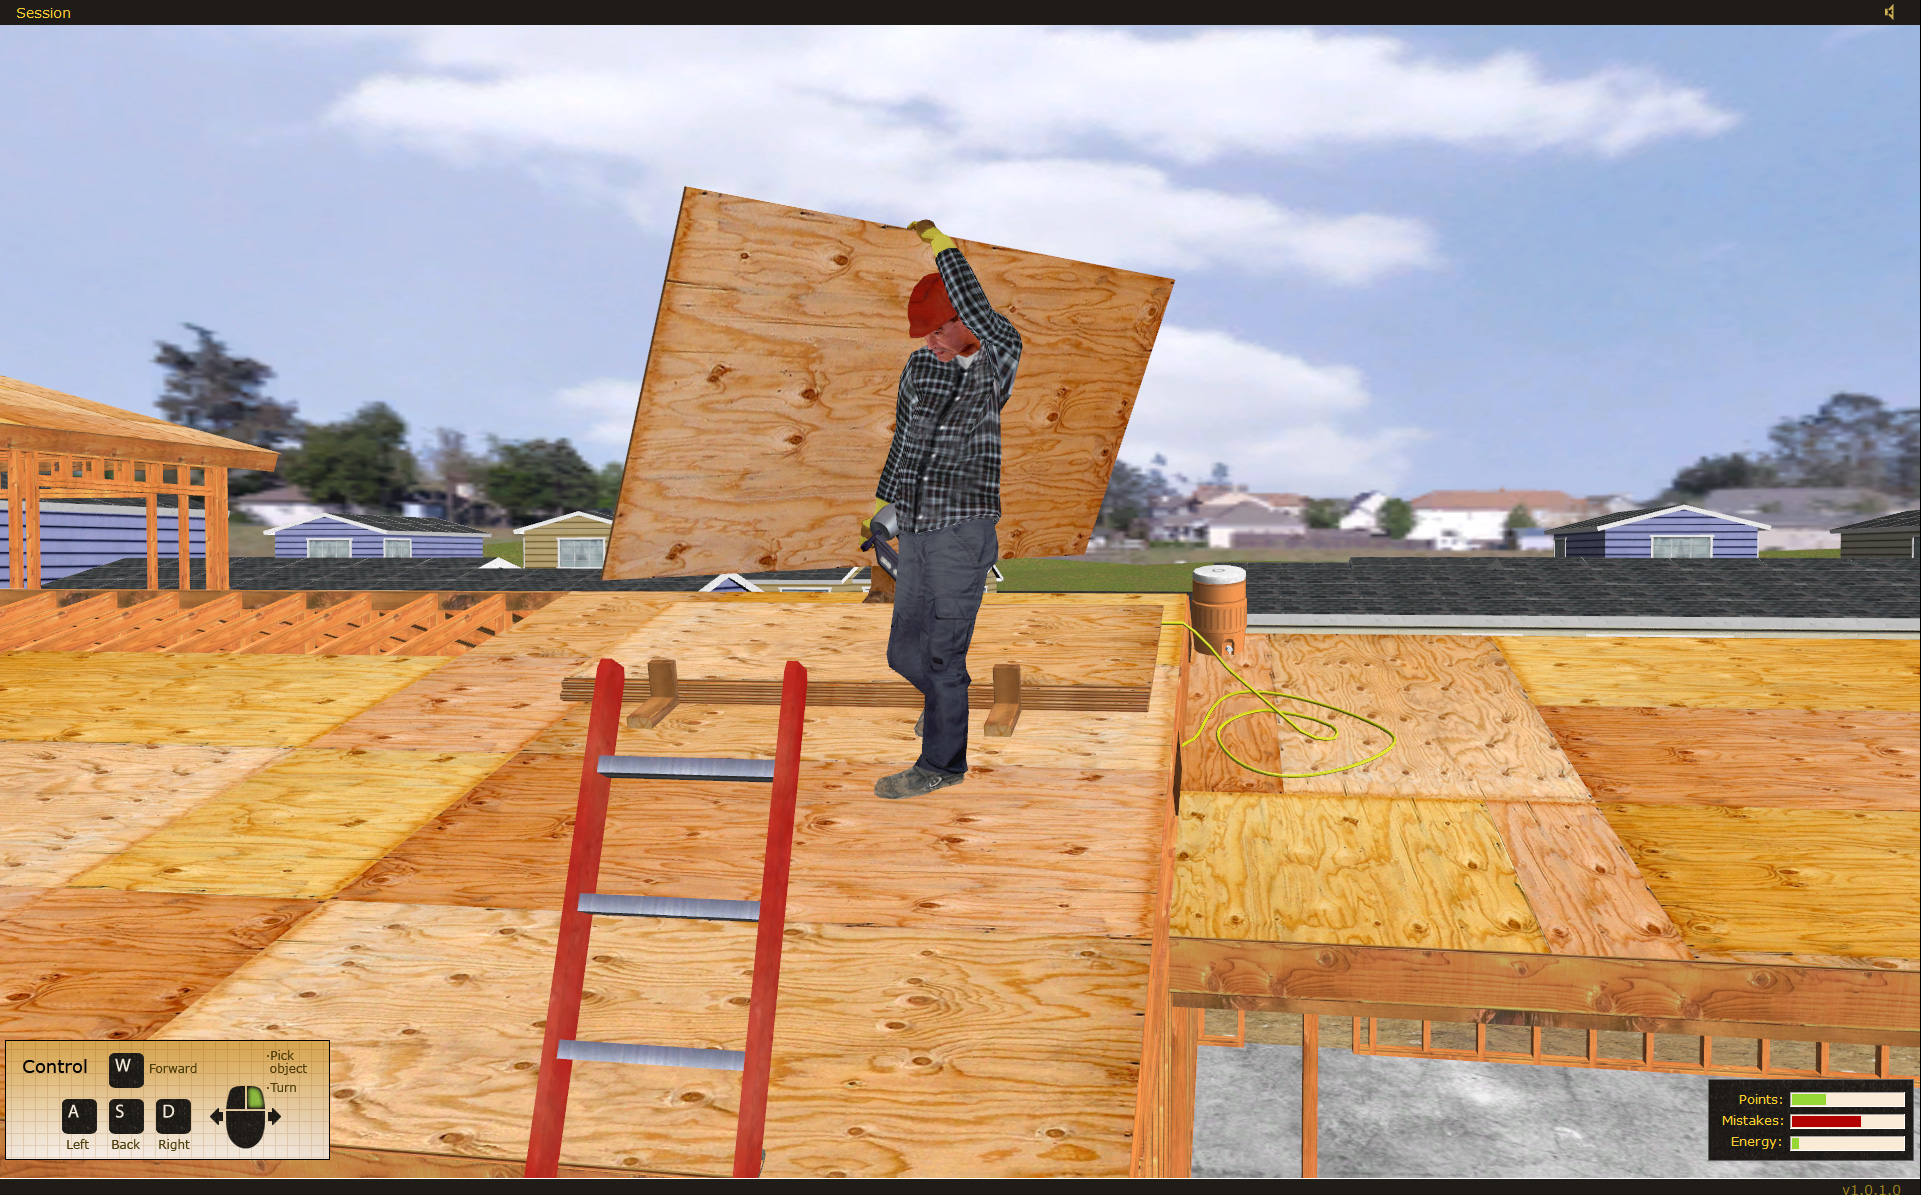 State Compensation Insurance Fund Safety Construction Ladder Safety raining Simulator by ForgeFX